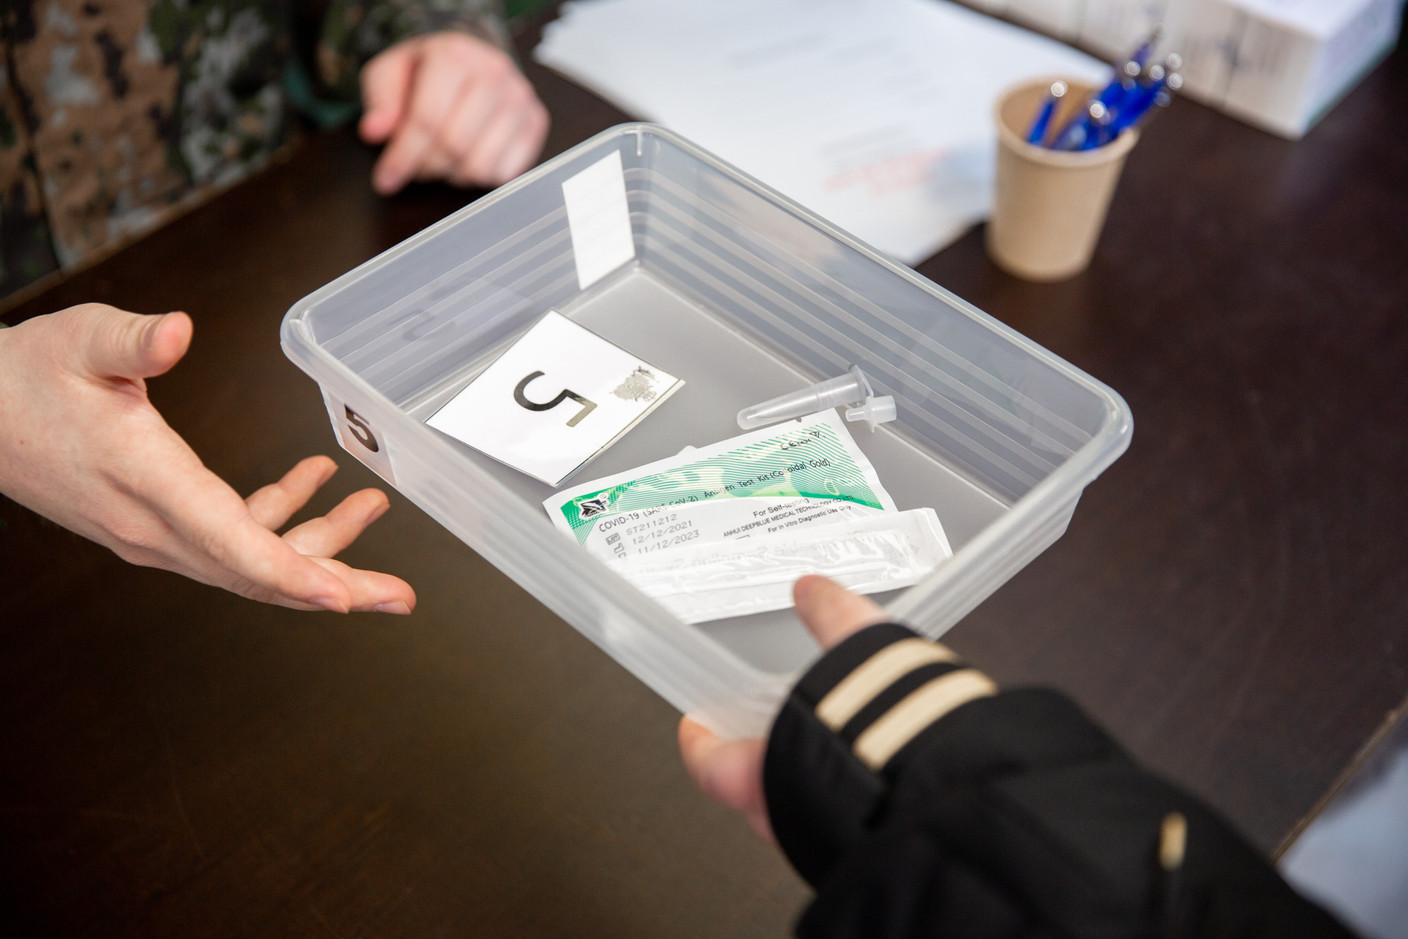 On arrival, the patient is given a box with his number and his self-test. He then carries out the test under the supervision of a member of the army. (Photo: Romain Gamba/Maison Moderne)